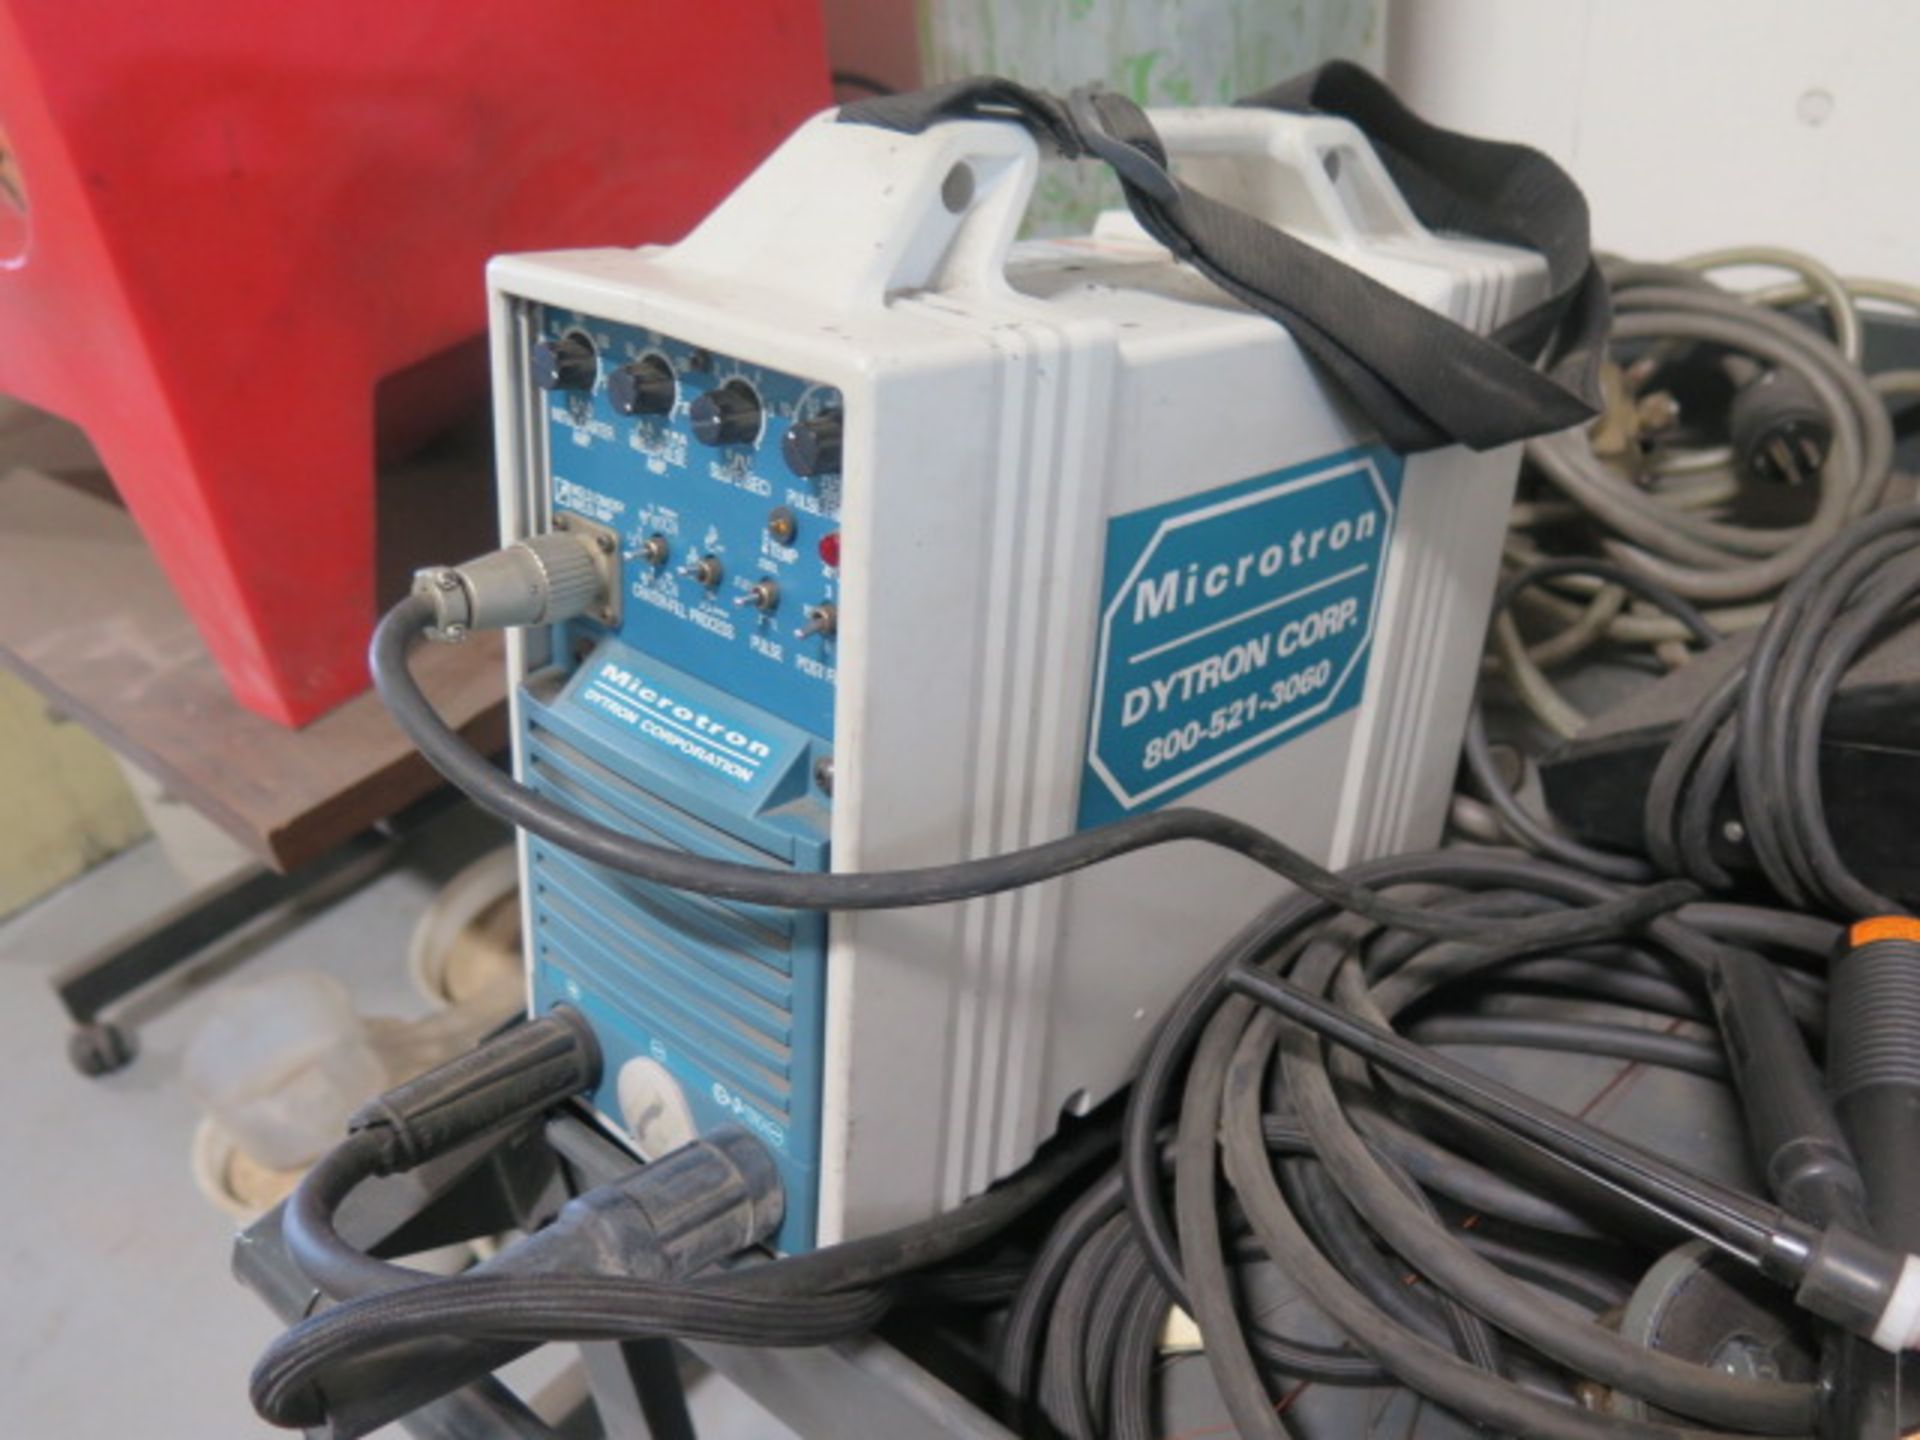 Dytron Microtron Welding Power Source (SOLD AS-IS - NO WARRANTY) - Image 2 of 7